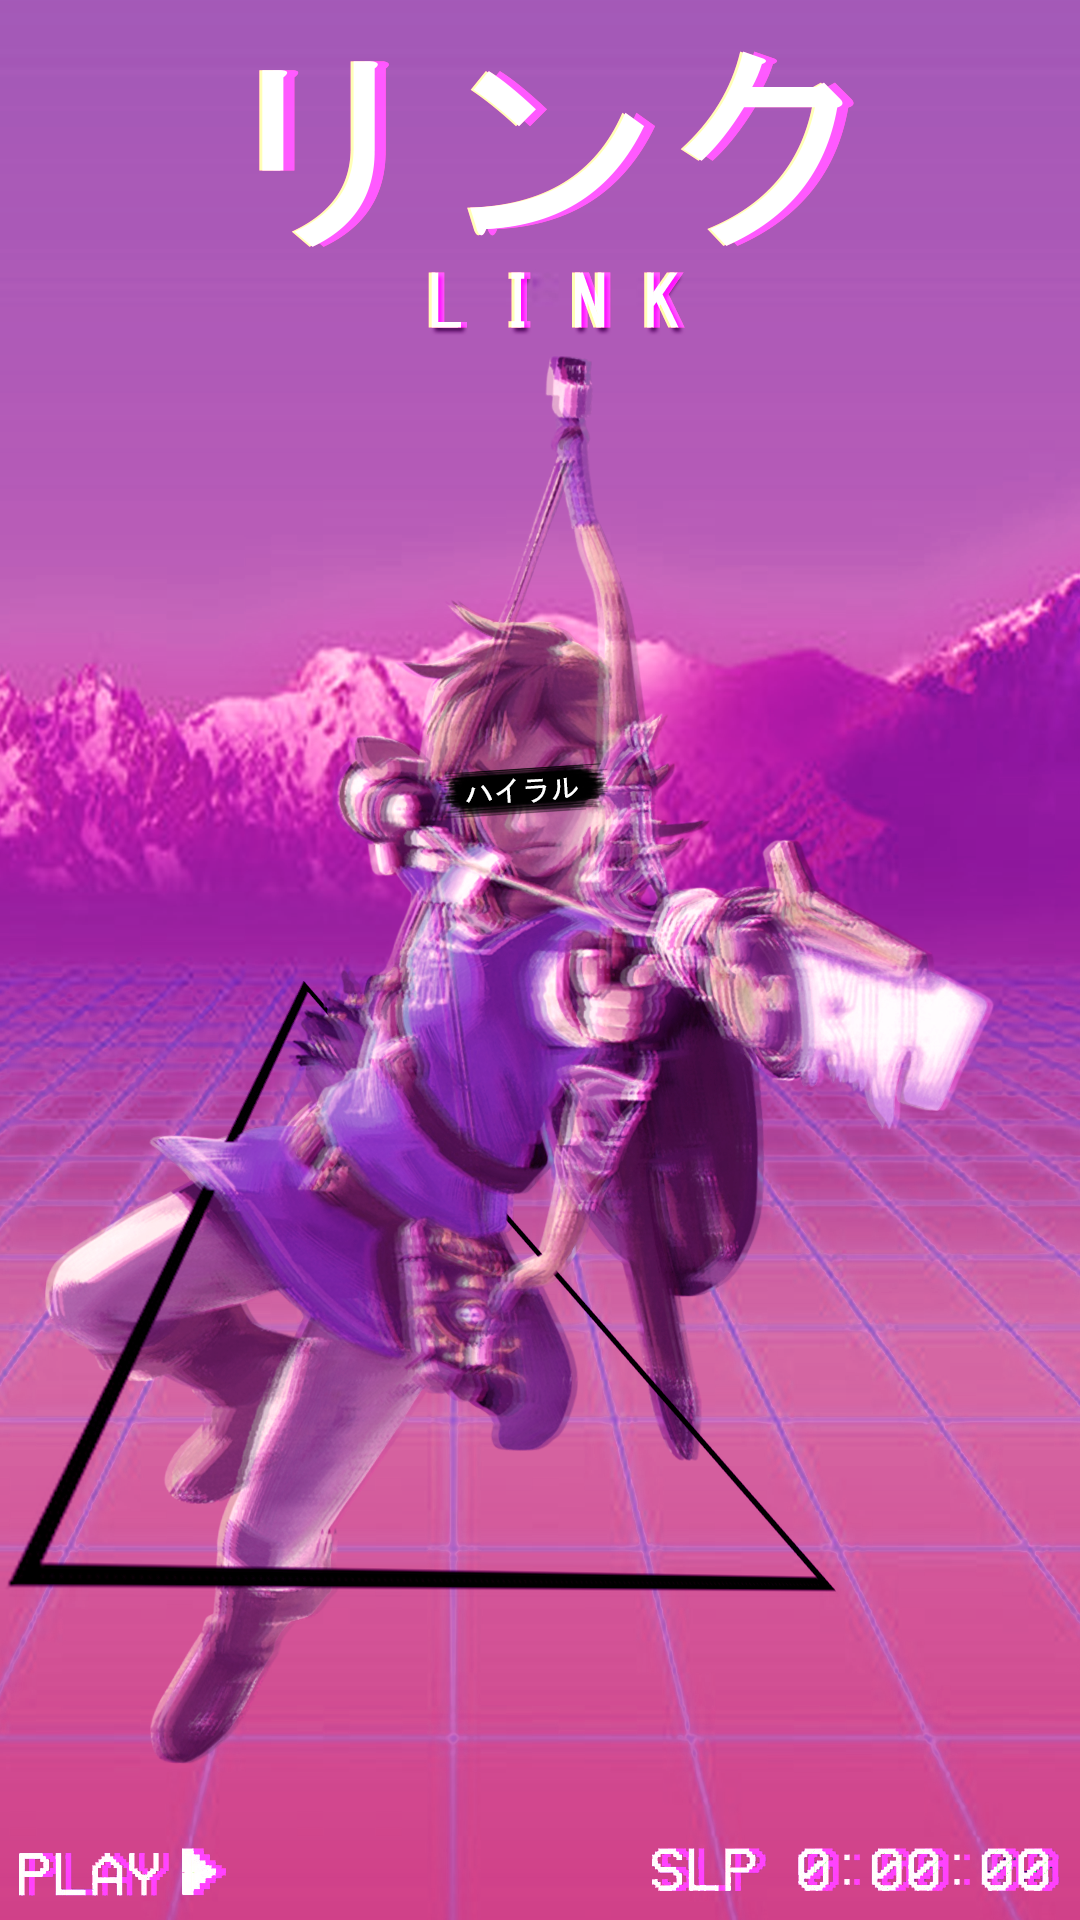 I Made A Link Vaporwave Wallpaper A While Back, Hope You Enjoy!, R Breath_of_the_Wild